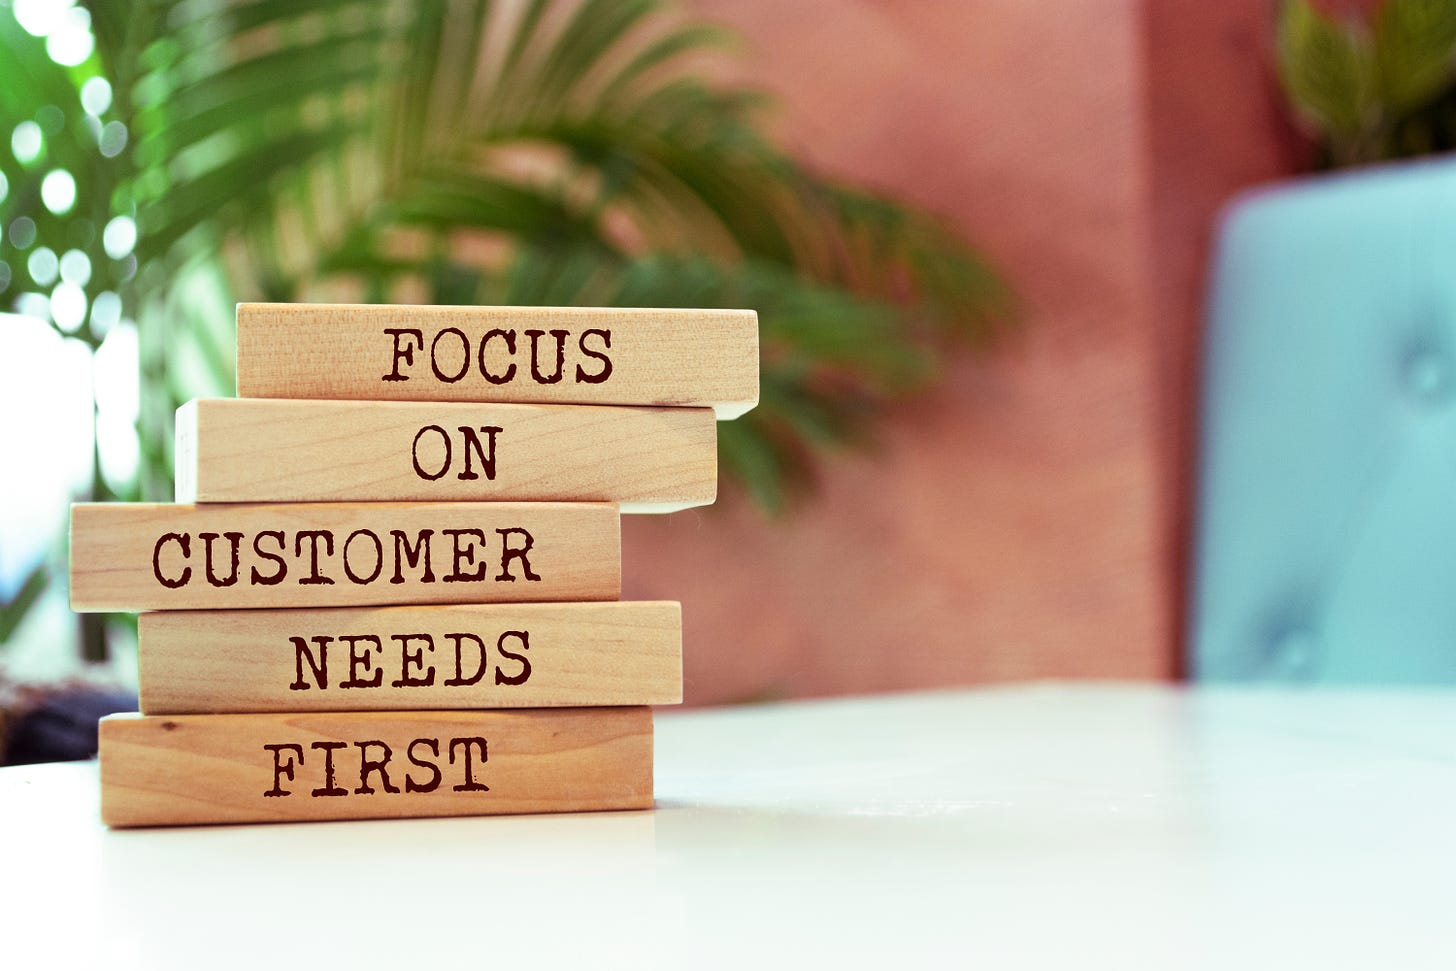 Blocks on a table that spell out "Focus on Customer Needs first"